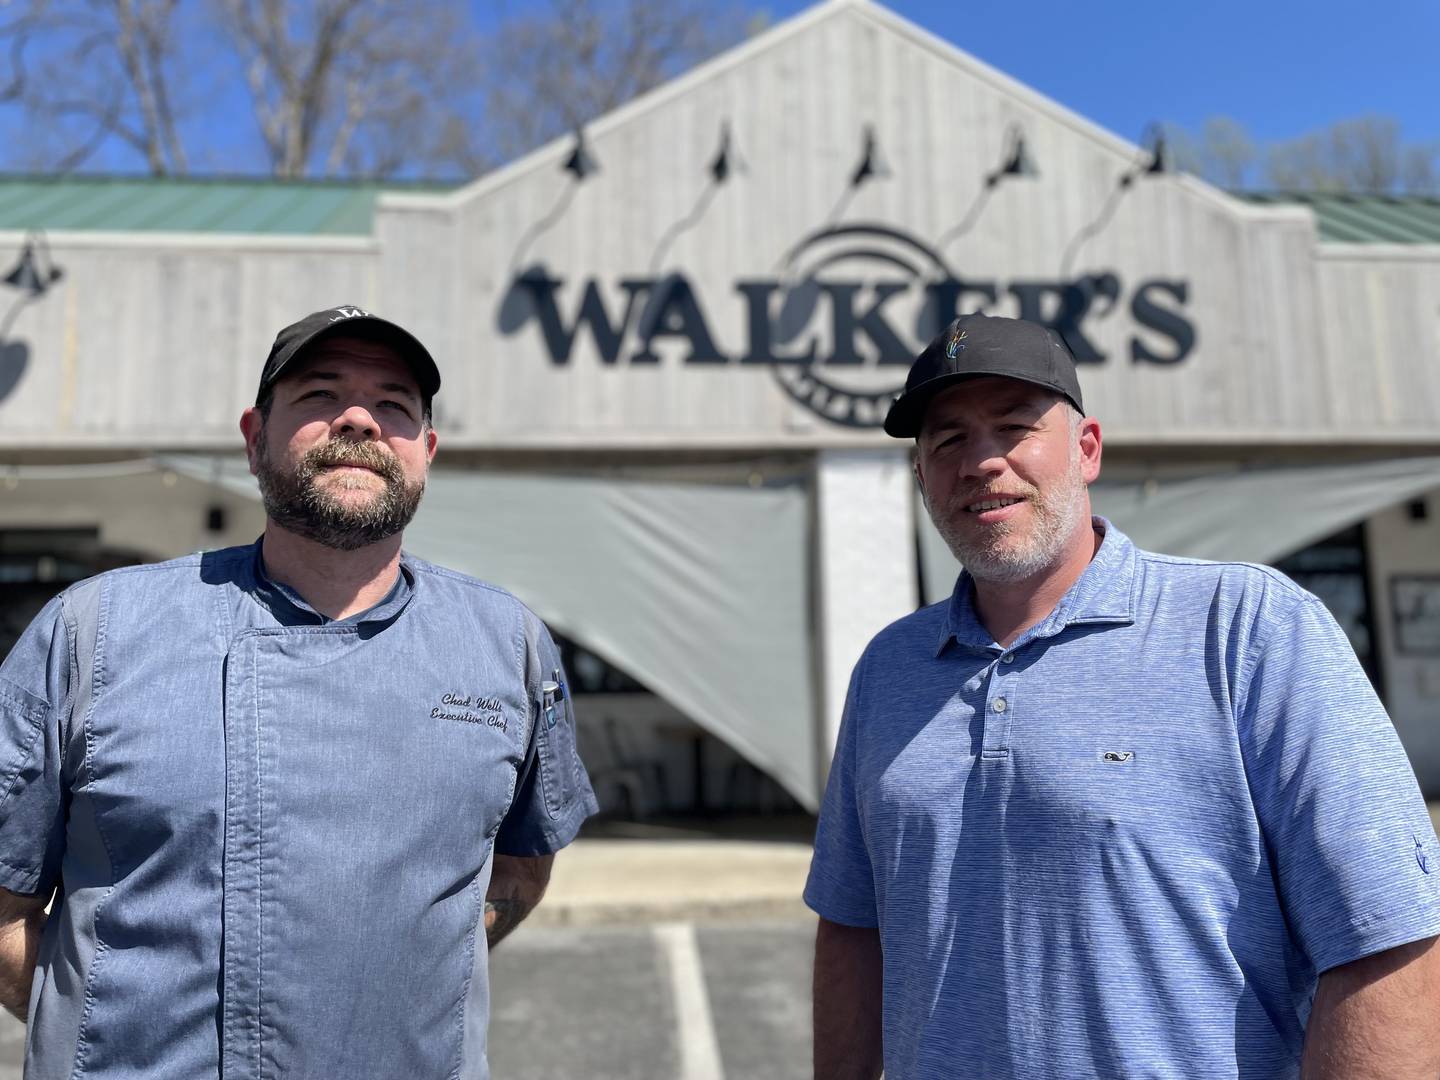 Chad Wells (left) and Anthony DiGangi (right) are opening a new deli in the same shopping center as Walker's Tap & Table.